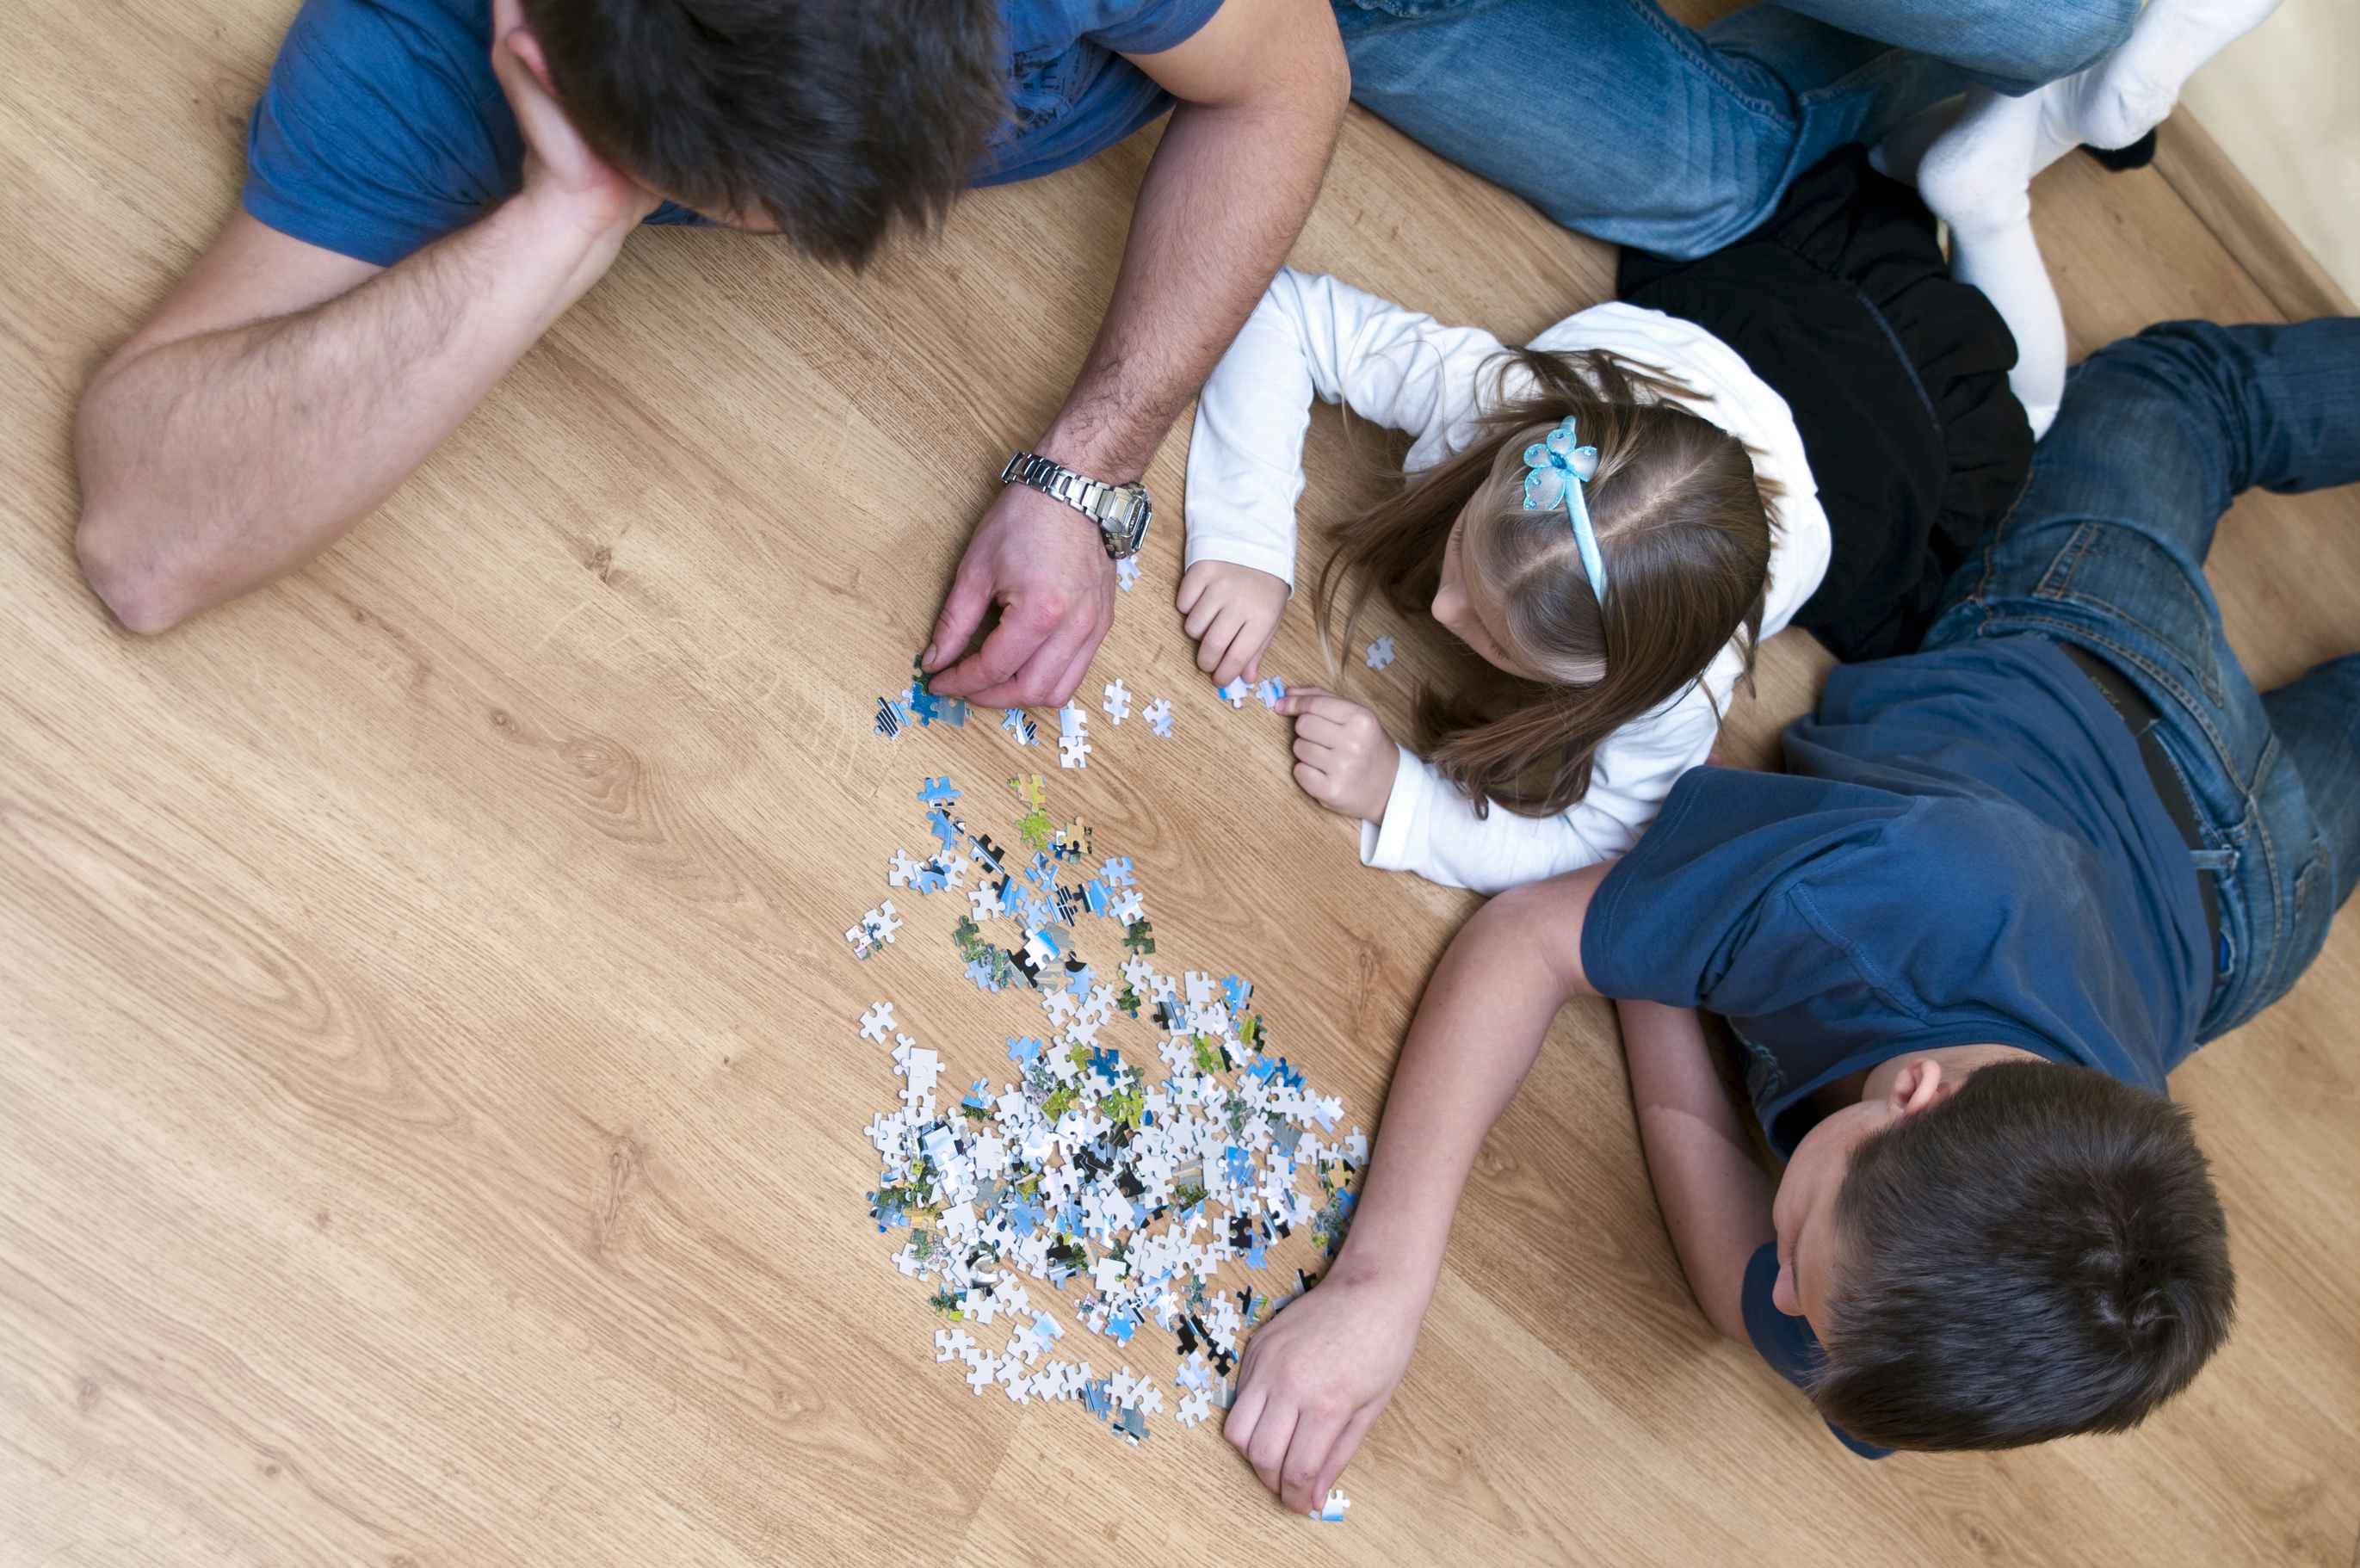 Family works on a puzzle together on the floor.